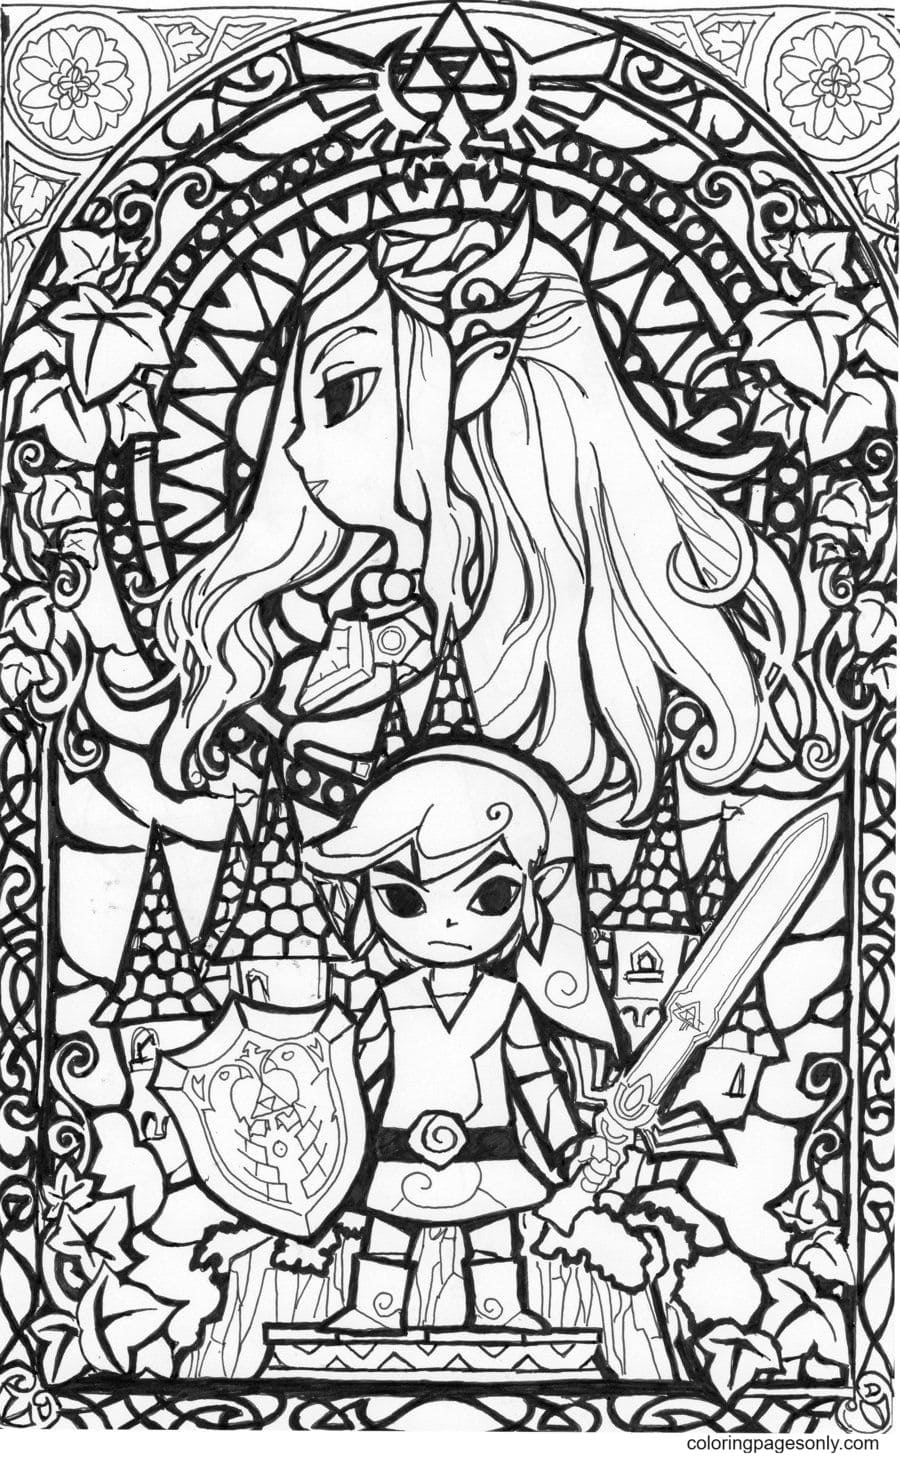 The Legend of Zelda Coloring Page